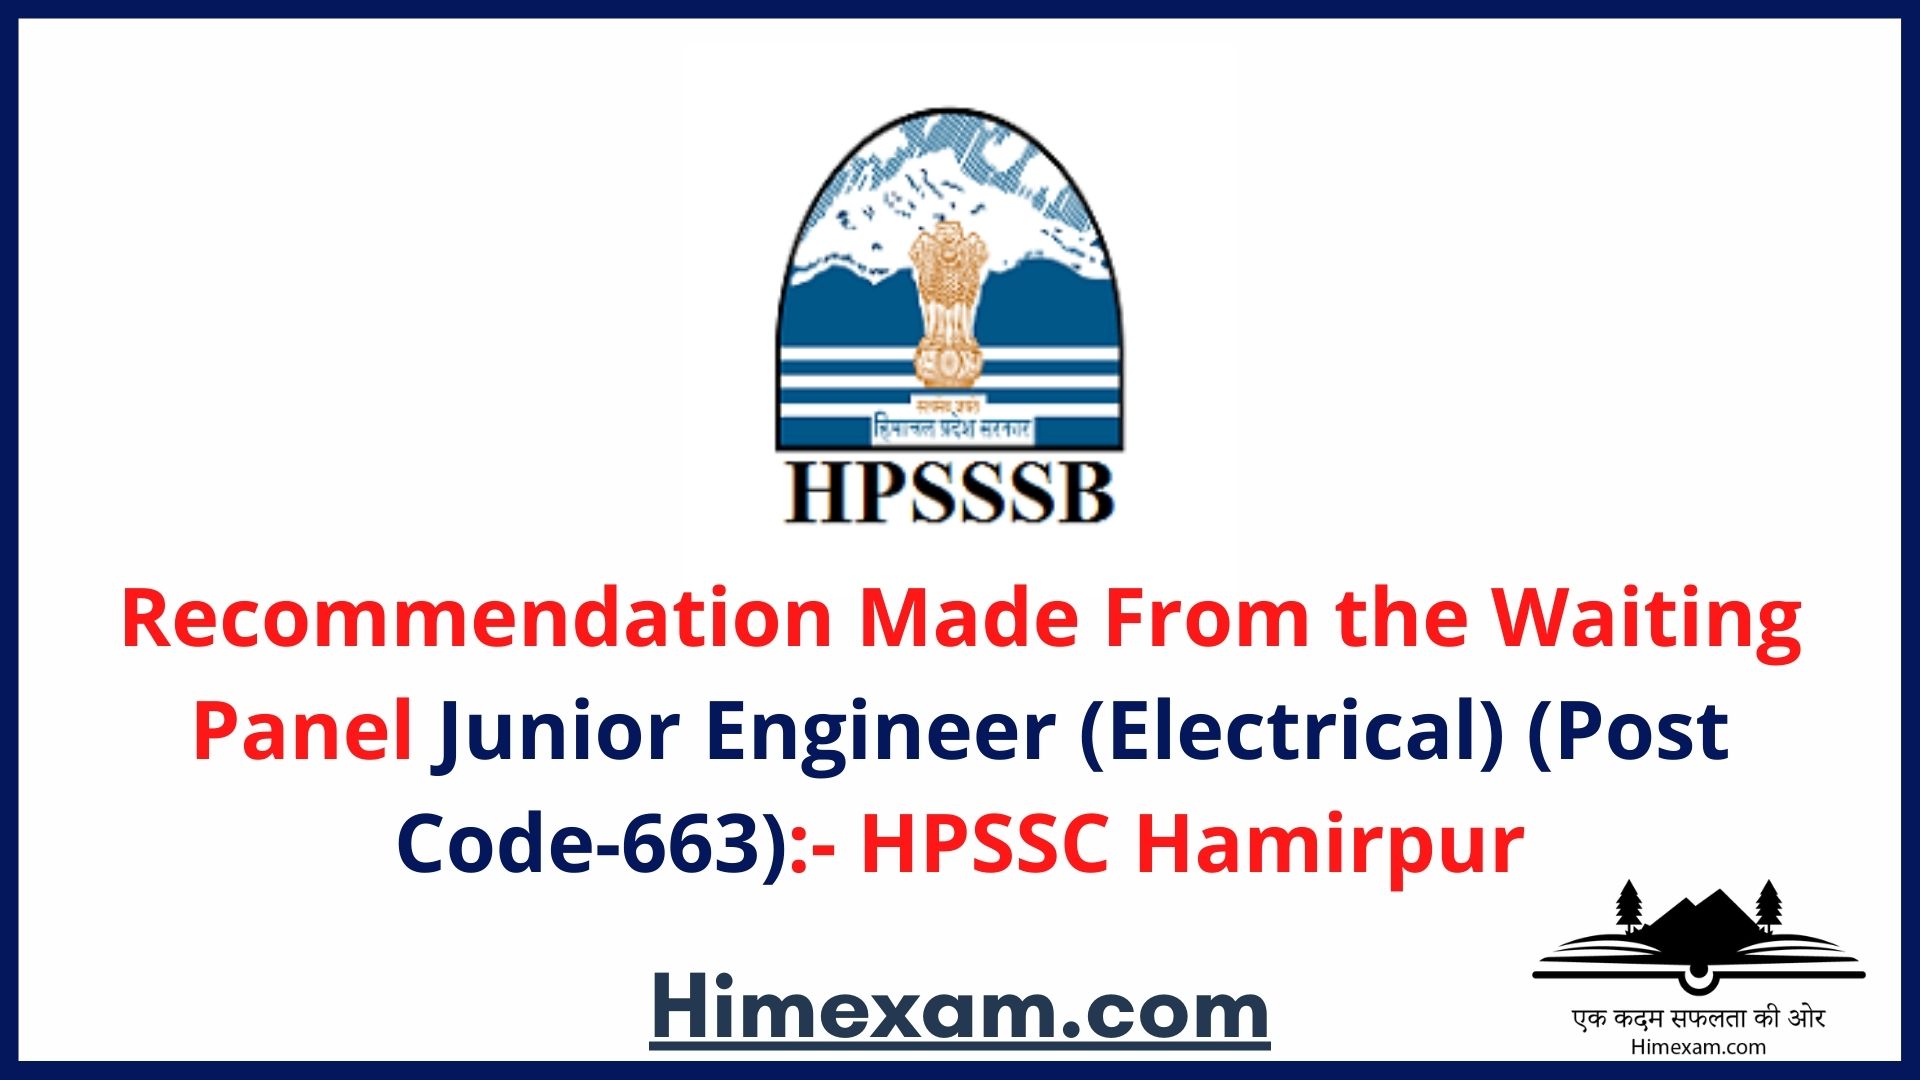 Recommendation Made From the Waiting Panel Junior Engineer (Electrical) (Post Code-663):- HPSSC Hamirpur